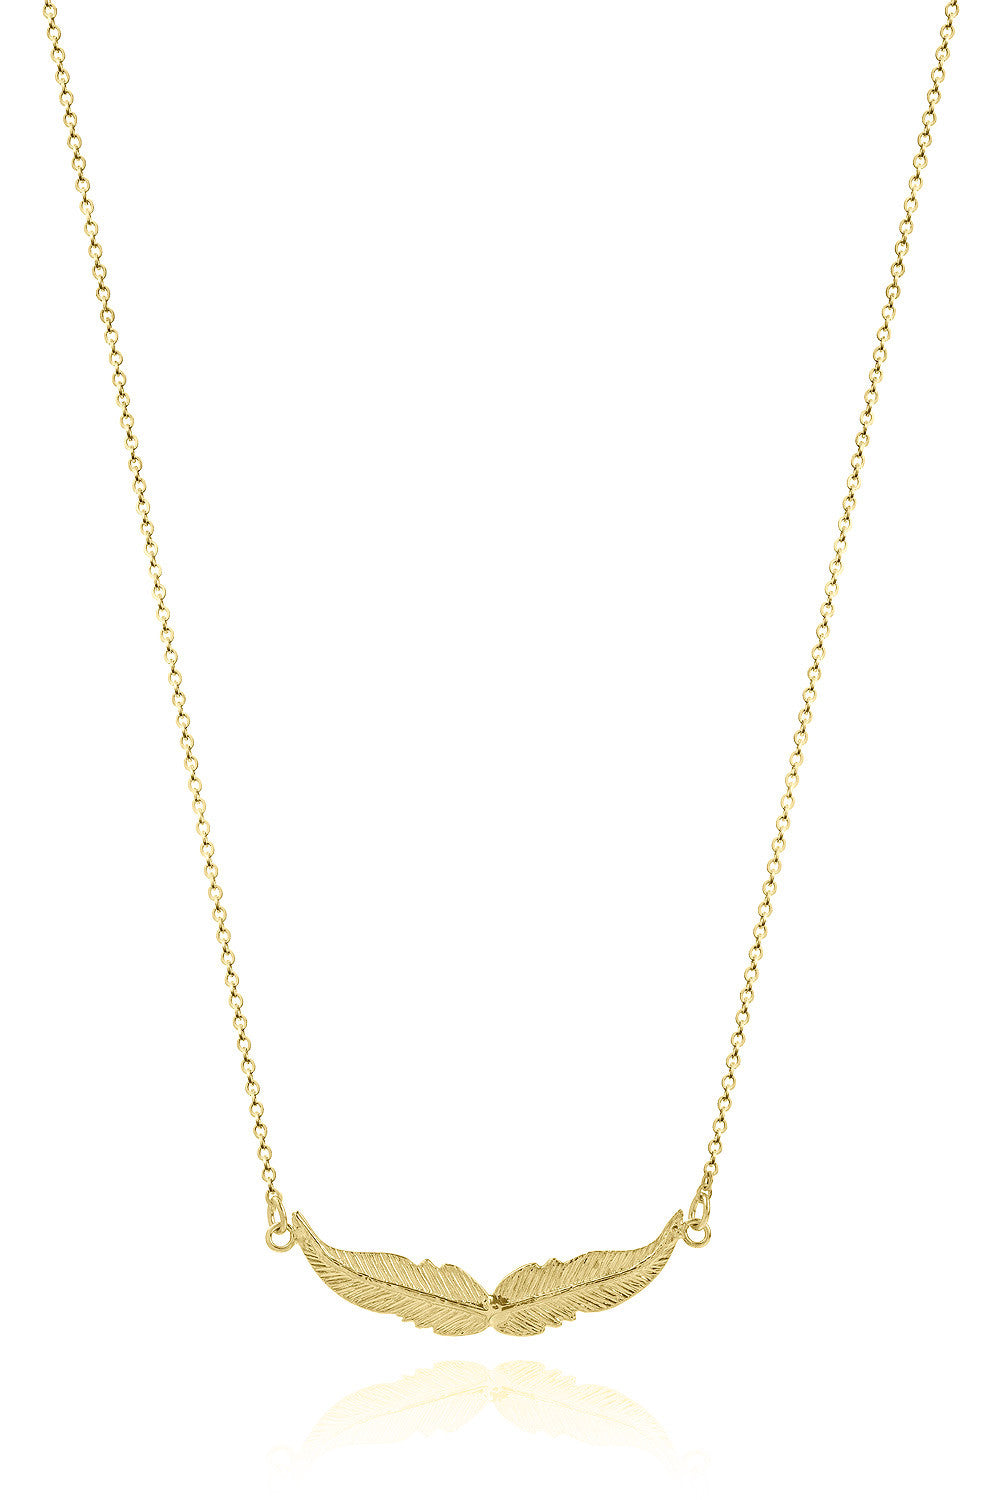 Necklace 14K Gold Wings - Sophie Simone Designs